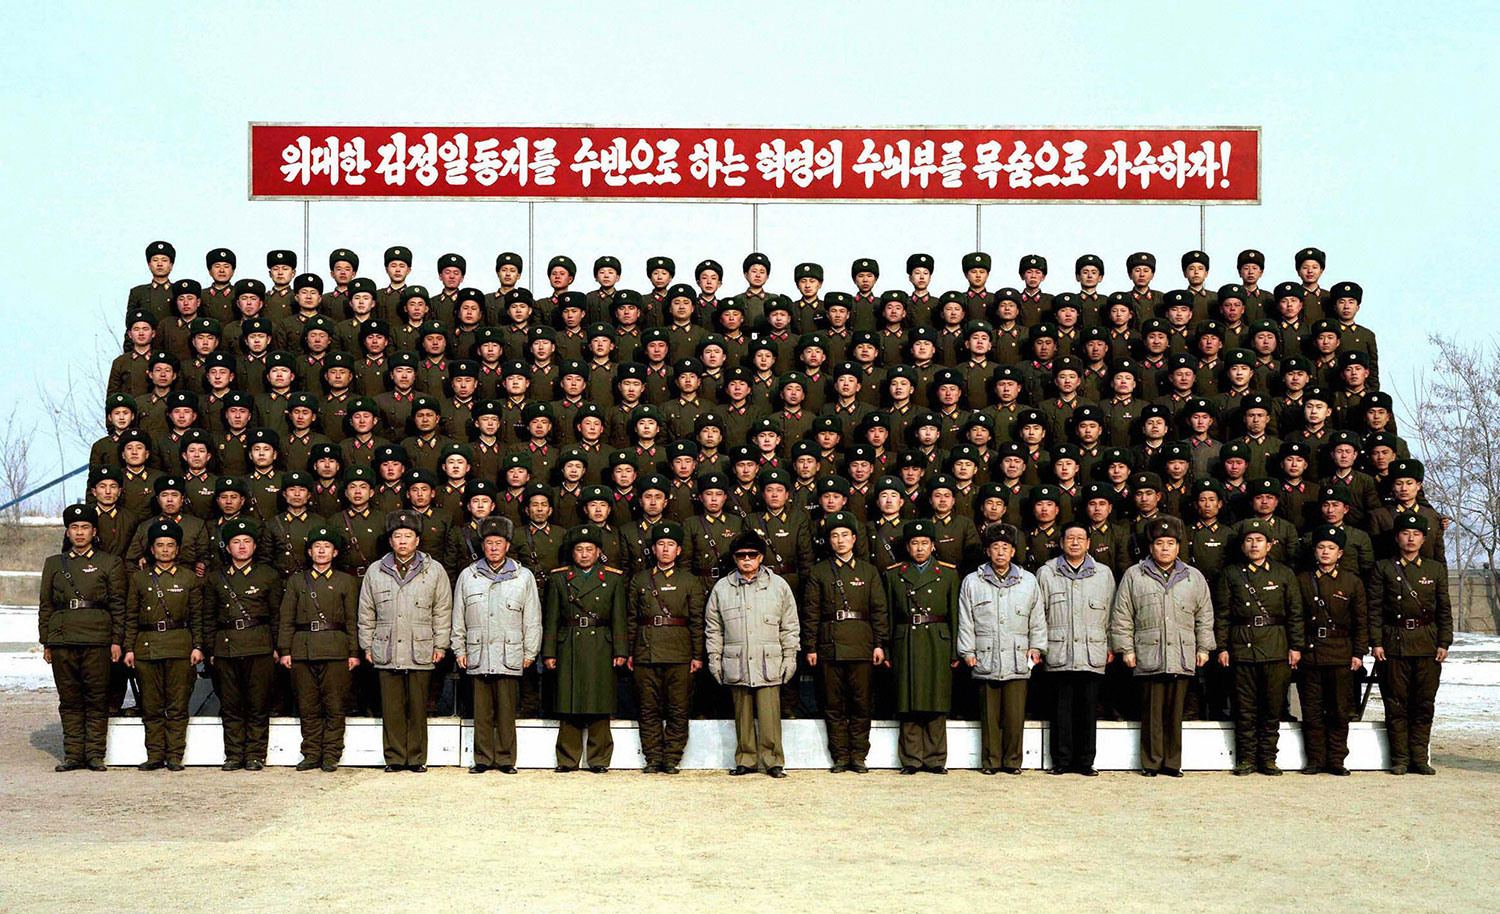 This undated picture, released by KCNA on Jan. 18, 2009, shows Kim Jong Il (center, in sunglasses) posing with soldiers as he inspects a sub-unit of a Korean People's Army Unit 2752 at undisclosed location.